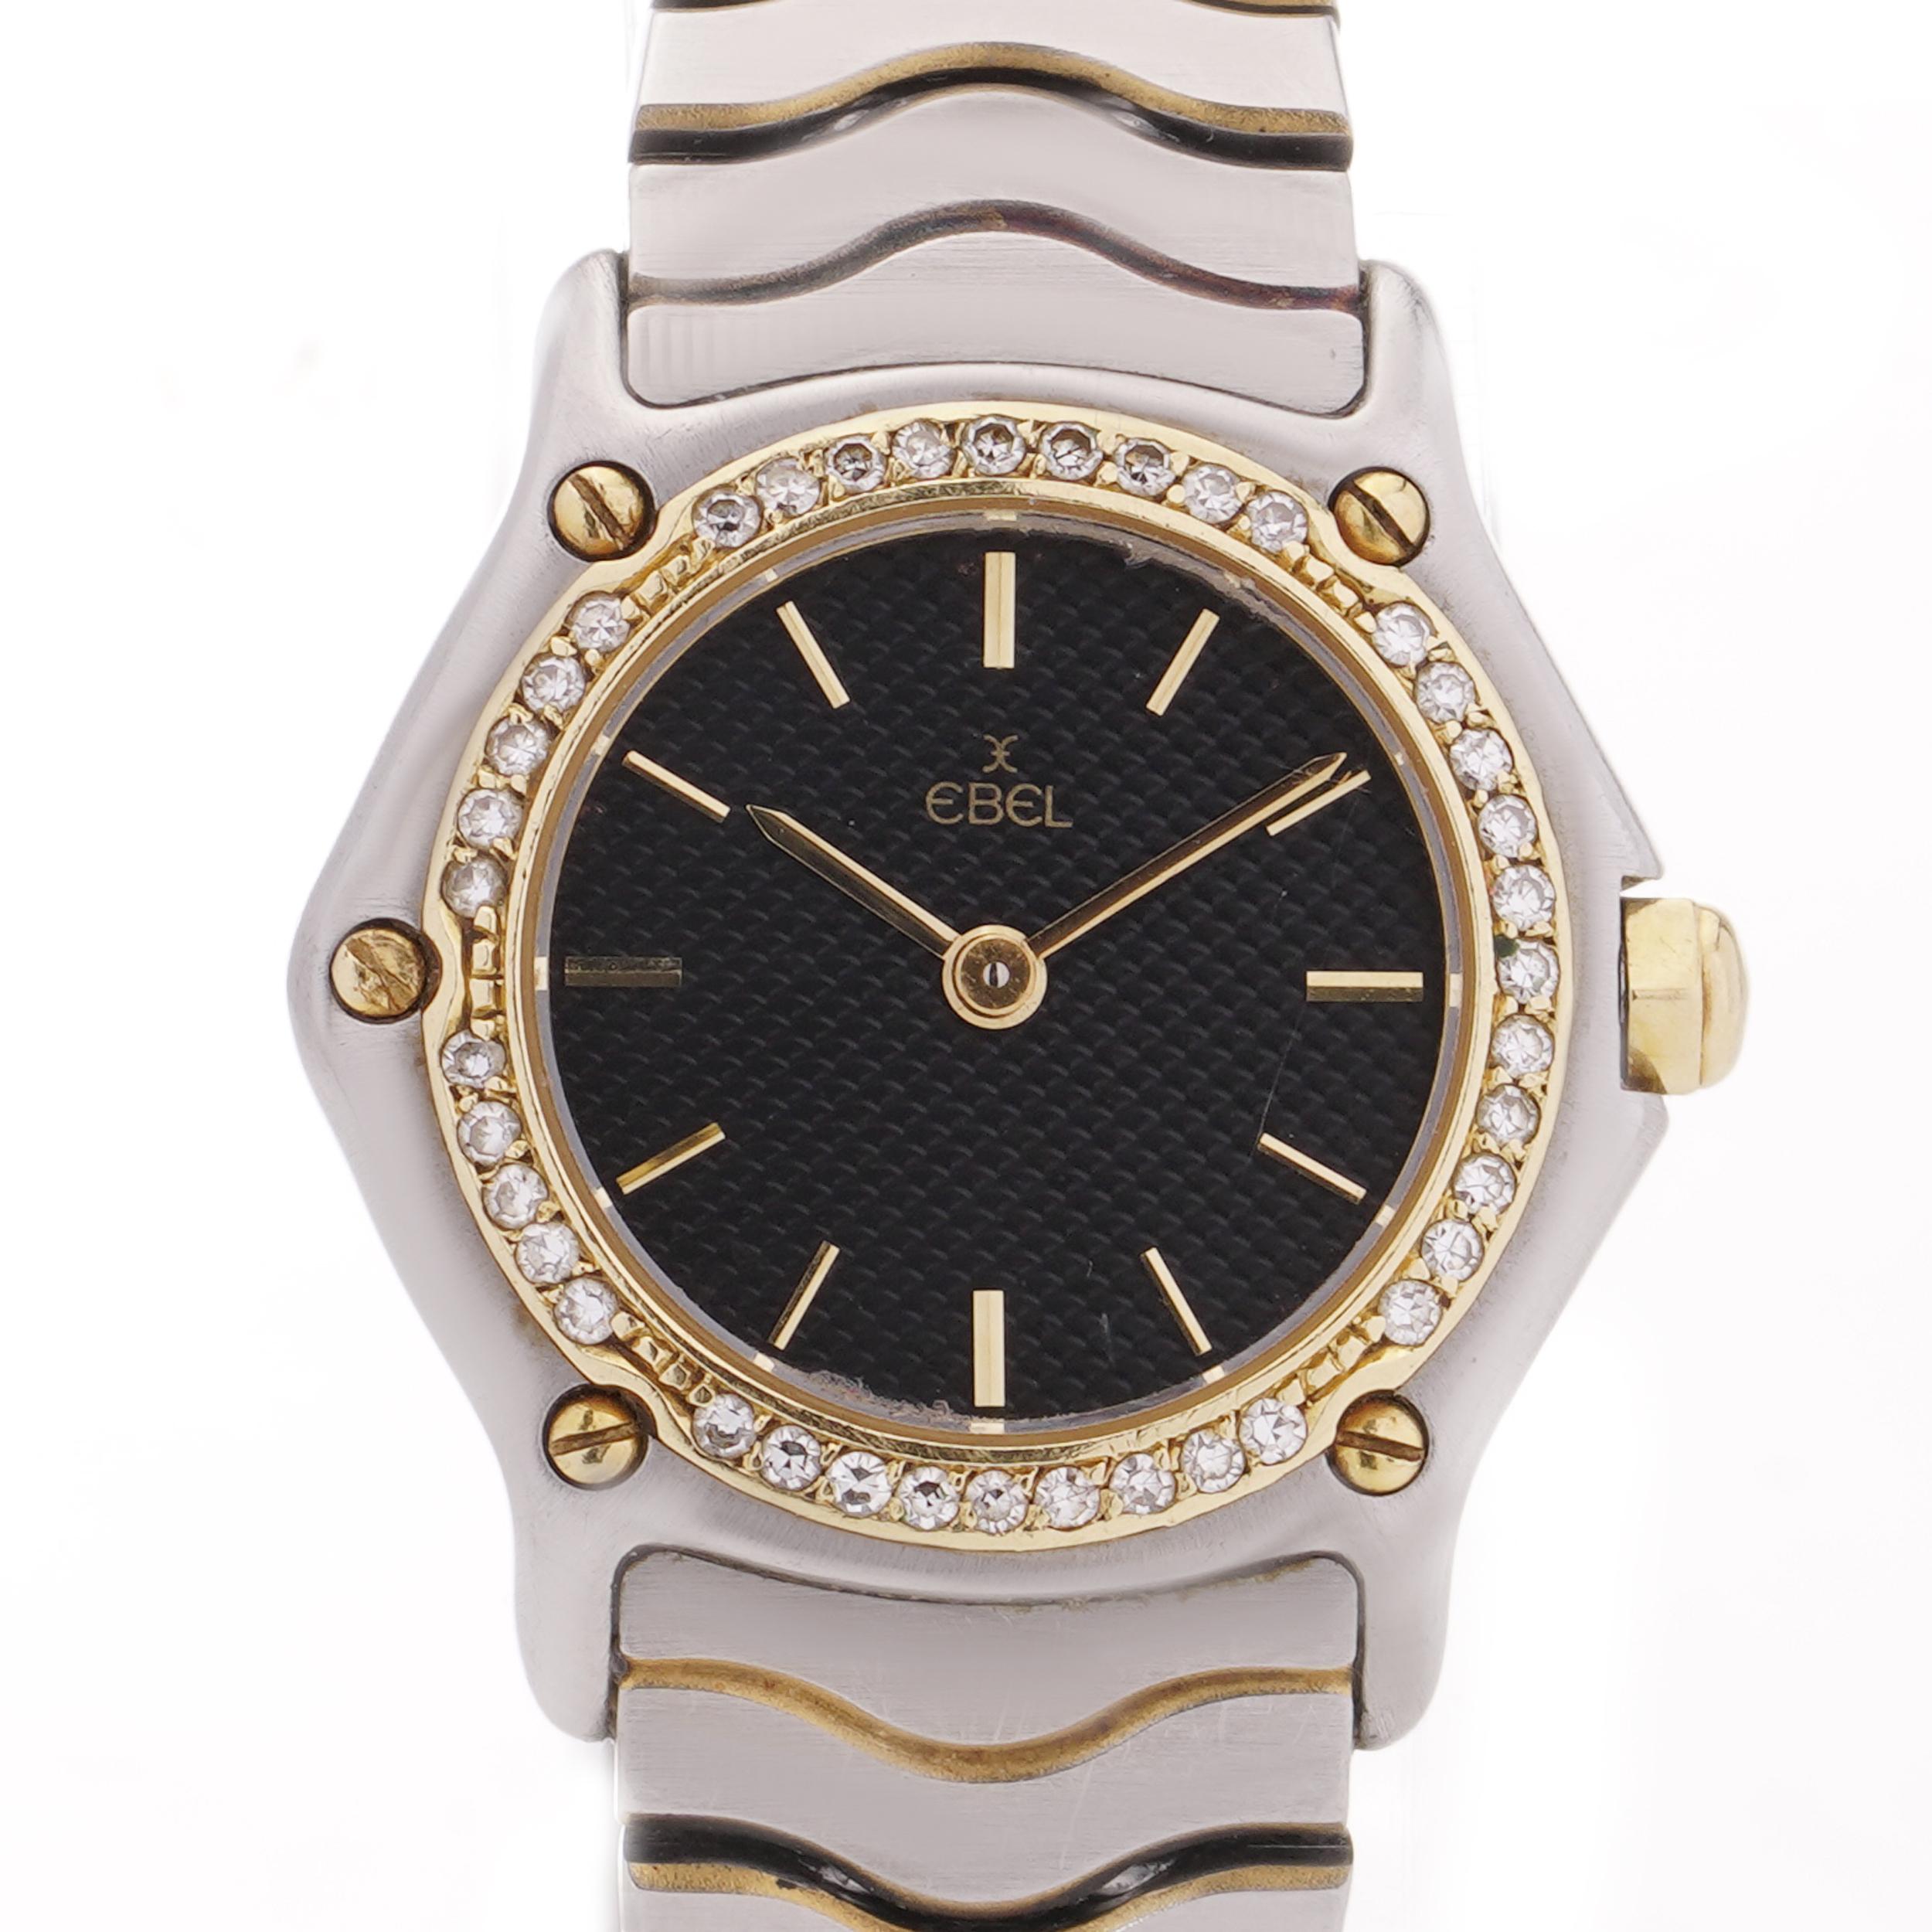 Ebel stainless steel and 18kt gold women's sports watch with round brilliant diamonds.

Year: 1980's
Model: Sports watch 
Ref: 166902-X,
Case Size: 22 mm 
Movement: Quartz
Dial colour: black 
Case Material: 18kt gold , stainless steel, diamonds